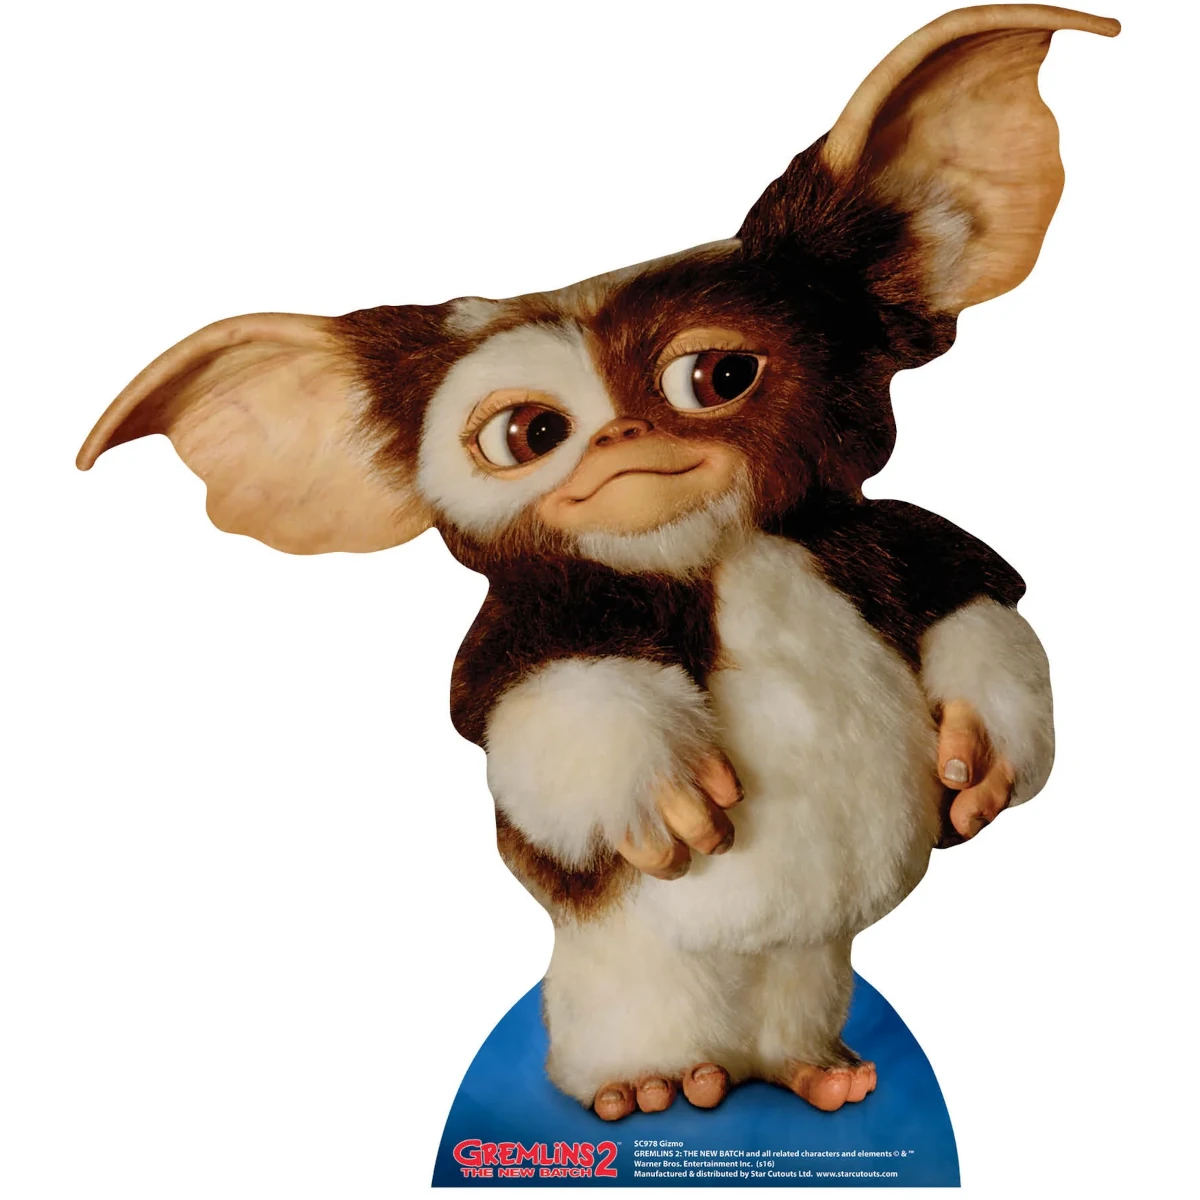 SC978 Gizmo (Gremlins 2) Official Lifesize Cardboard Cutout Standee Front